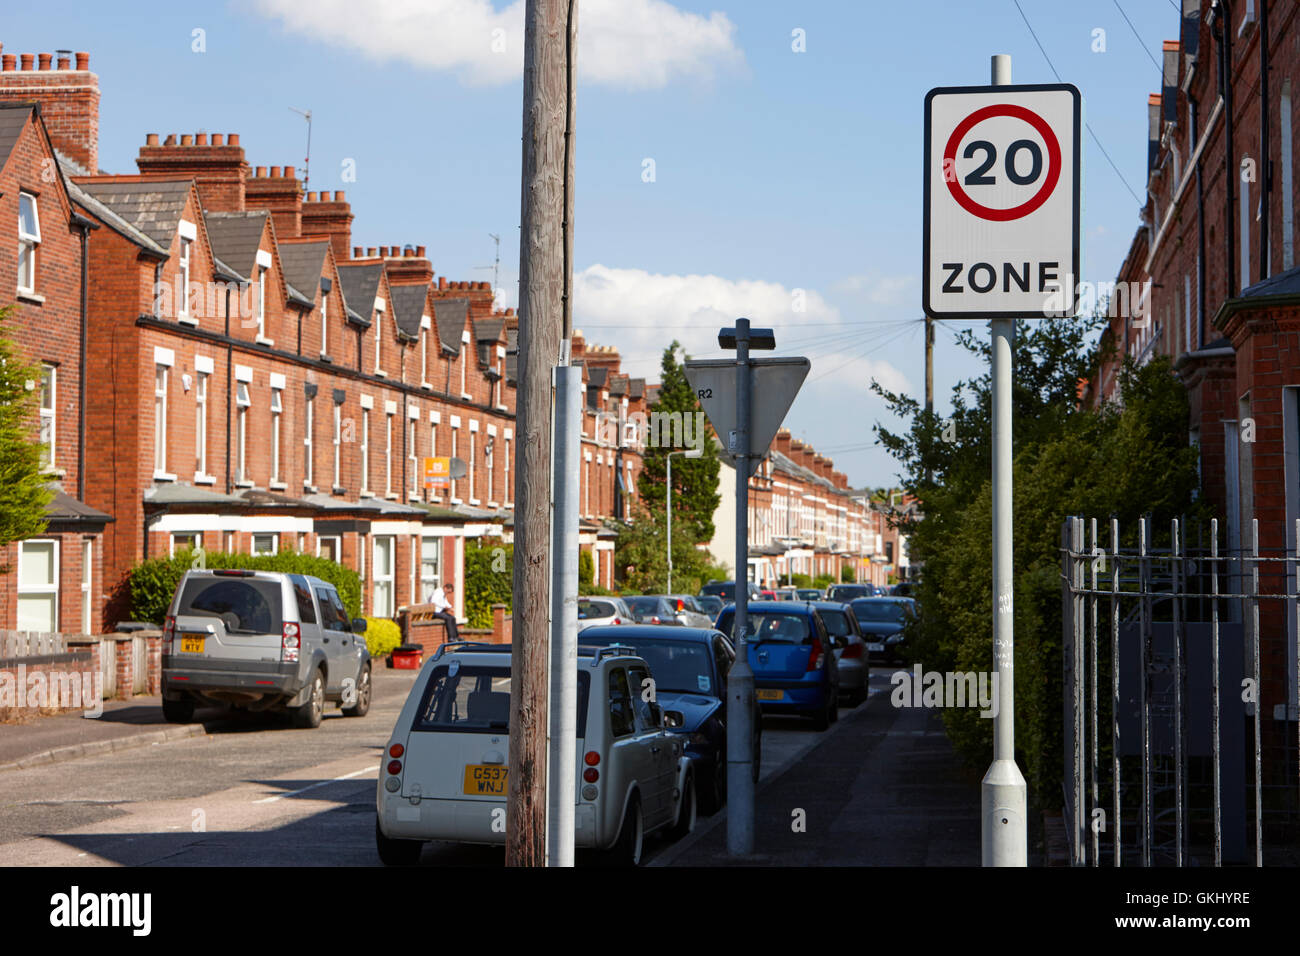 20 mph zone in a residential street with onstreet parking in terraced streets in the uk Stock Photo